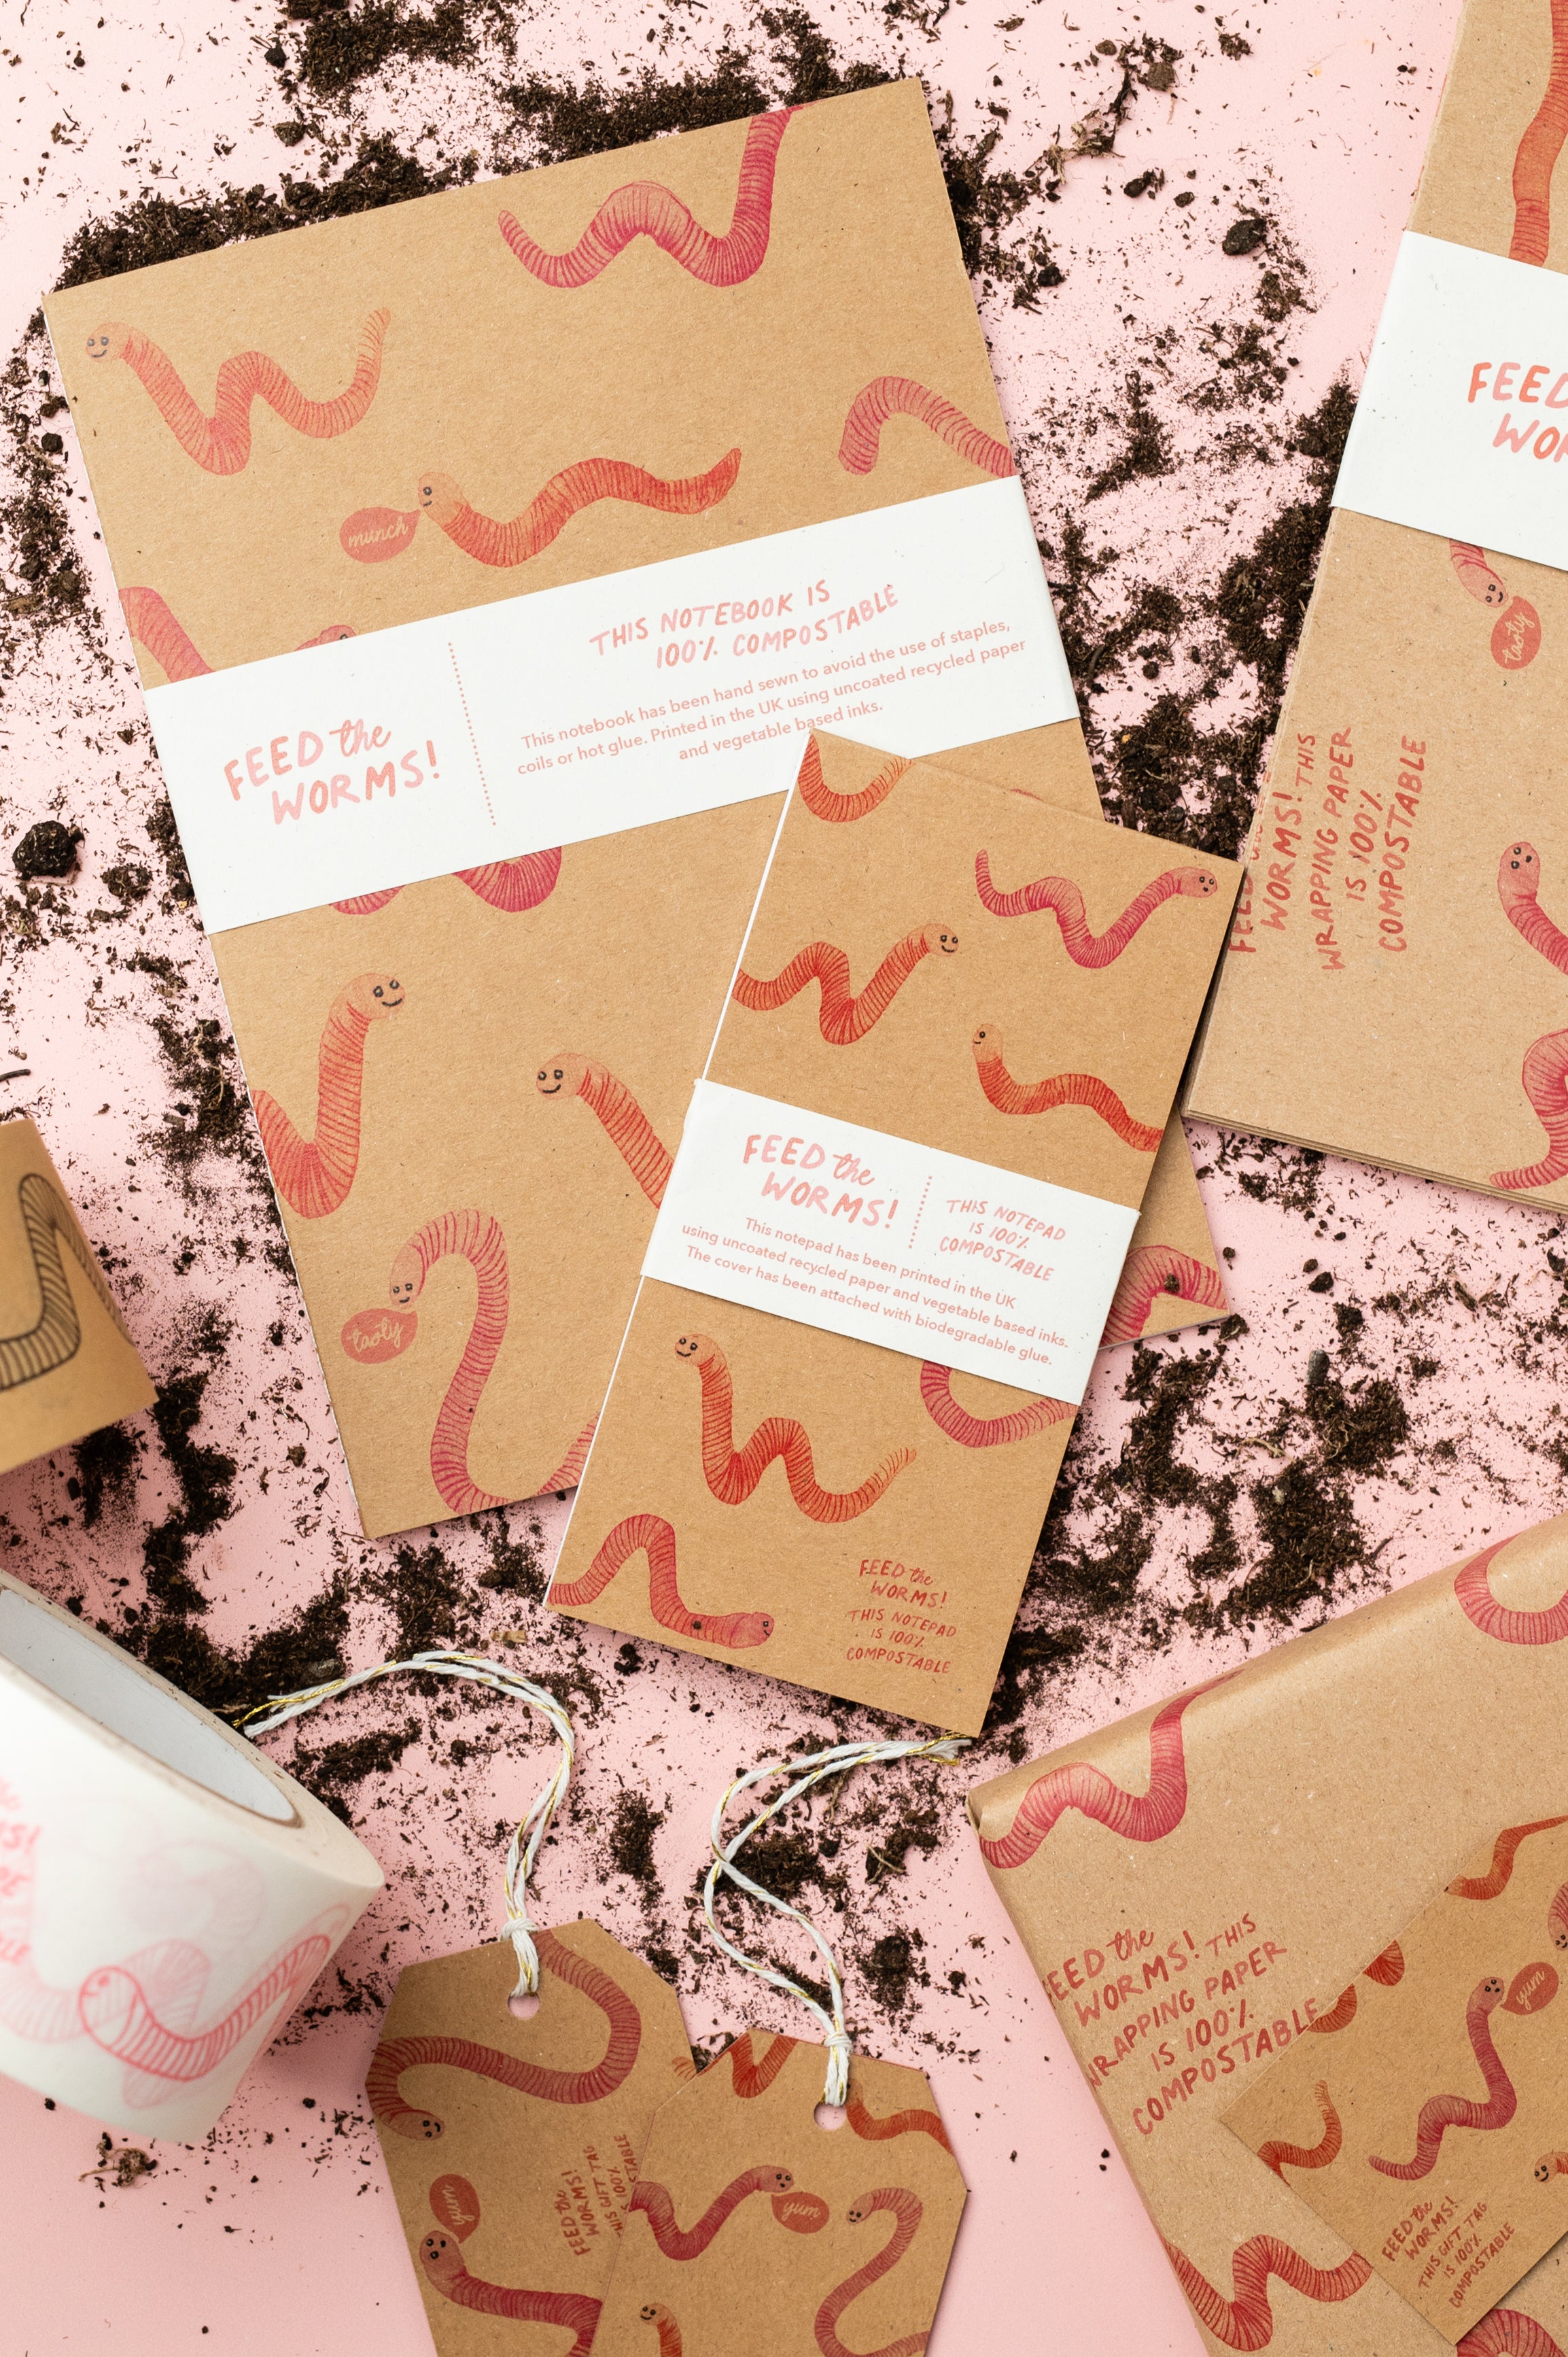 Ruby & Bo Feed The Worms 100% Compostable Stationery collection on a pink background